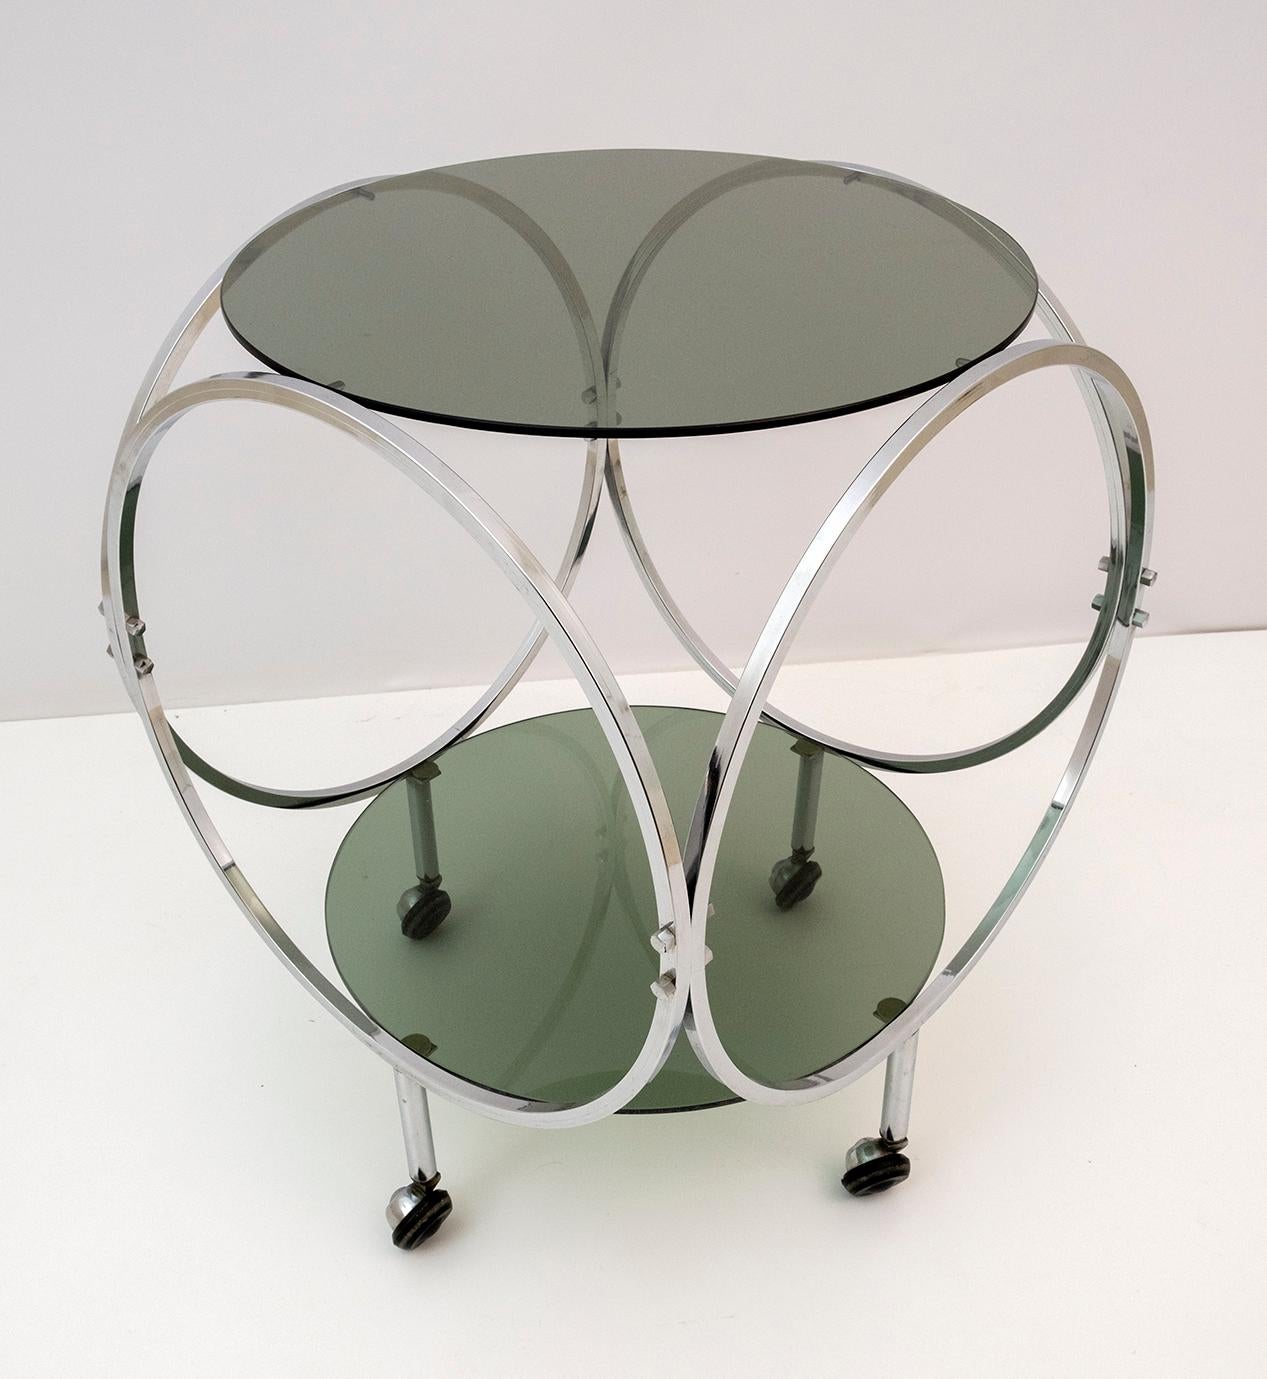 Italian Space Age Vintage Steel and Smoked Glass Coffee Table, 1970s For Sale